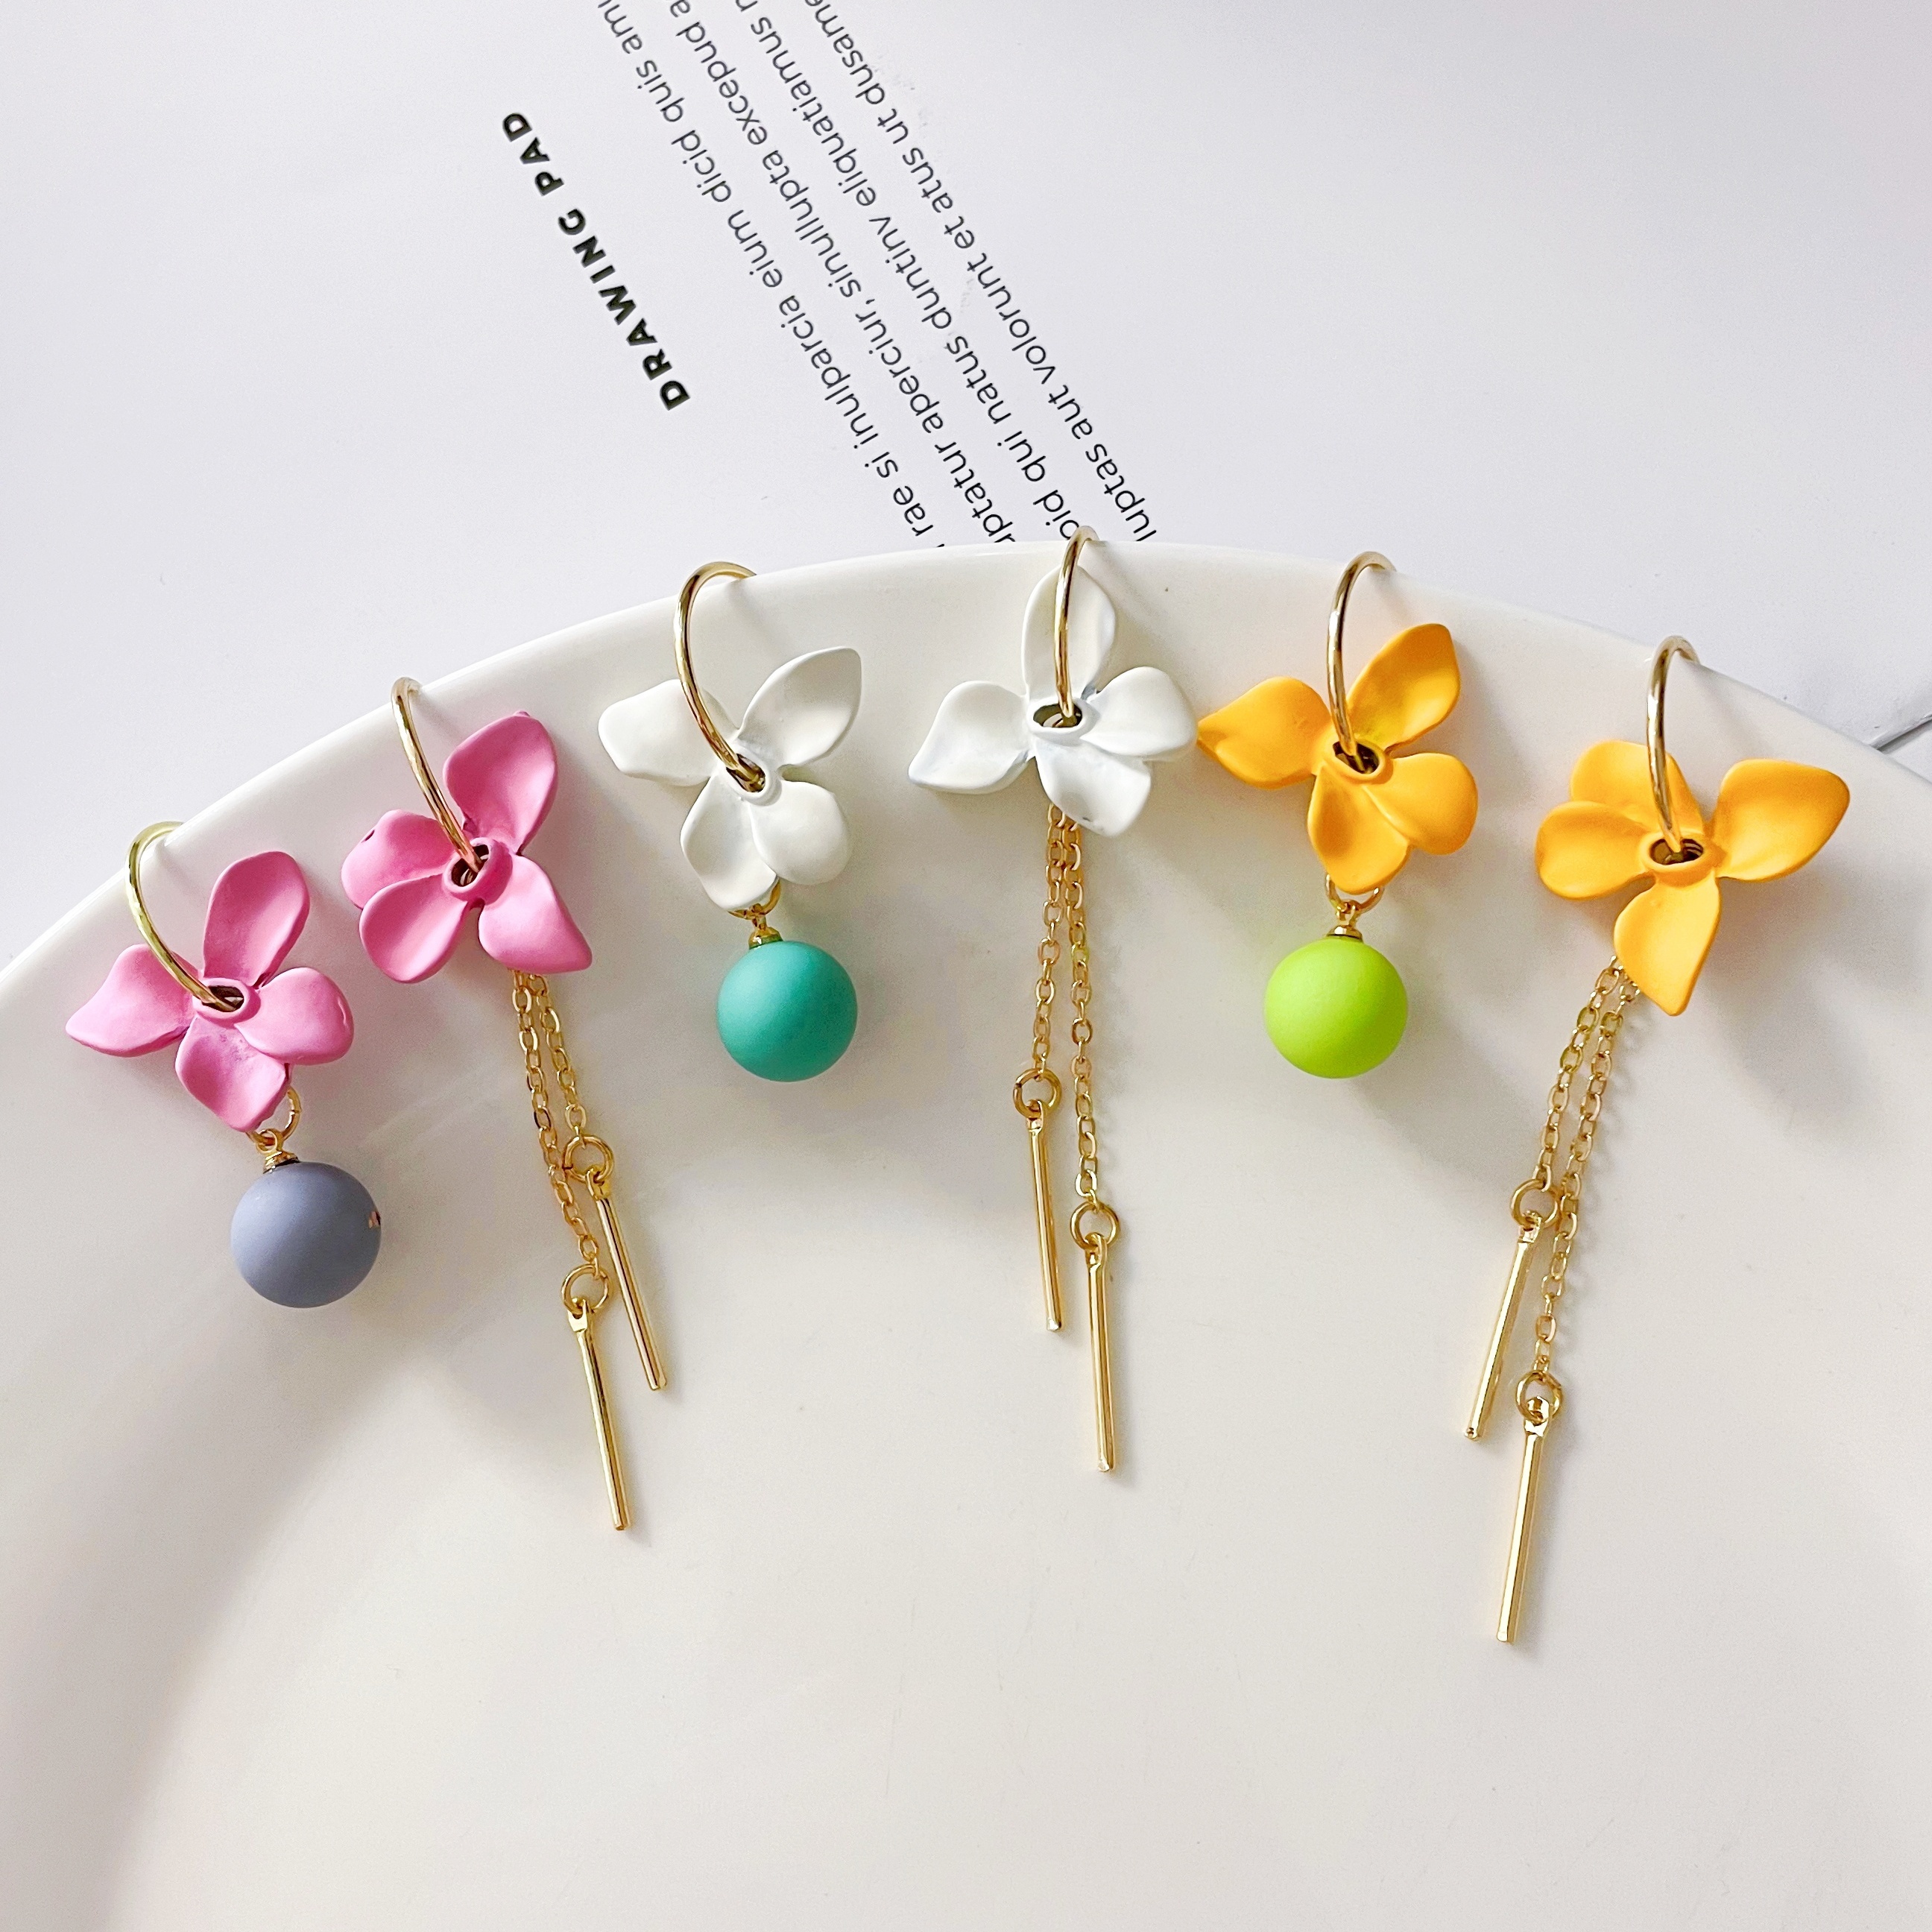 

1 Pair Of Mismatched Drop Earrings Dainty Flower Multi Colors For U To Choose Pick 1 U Prefer Match Daily Outfits Party Accessories